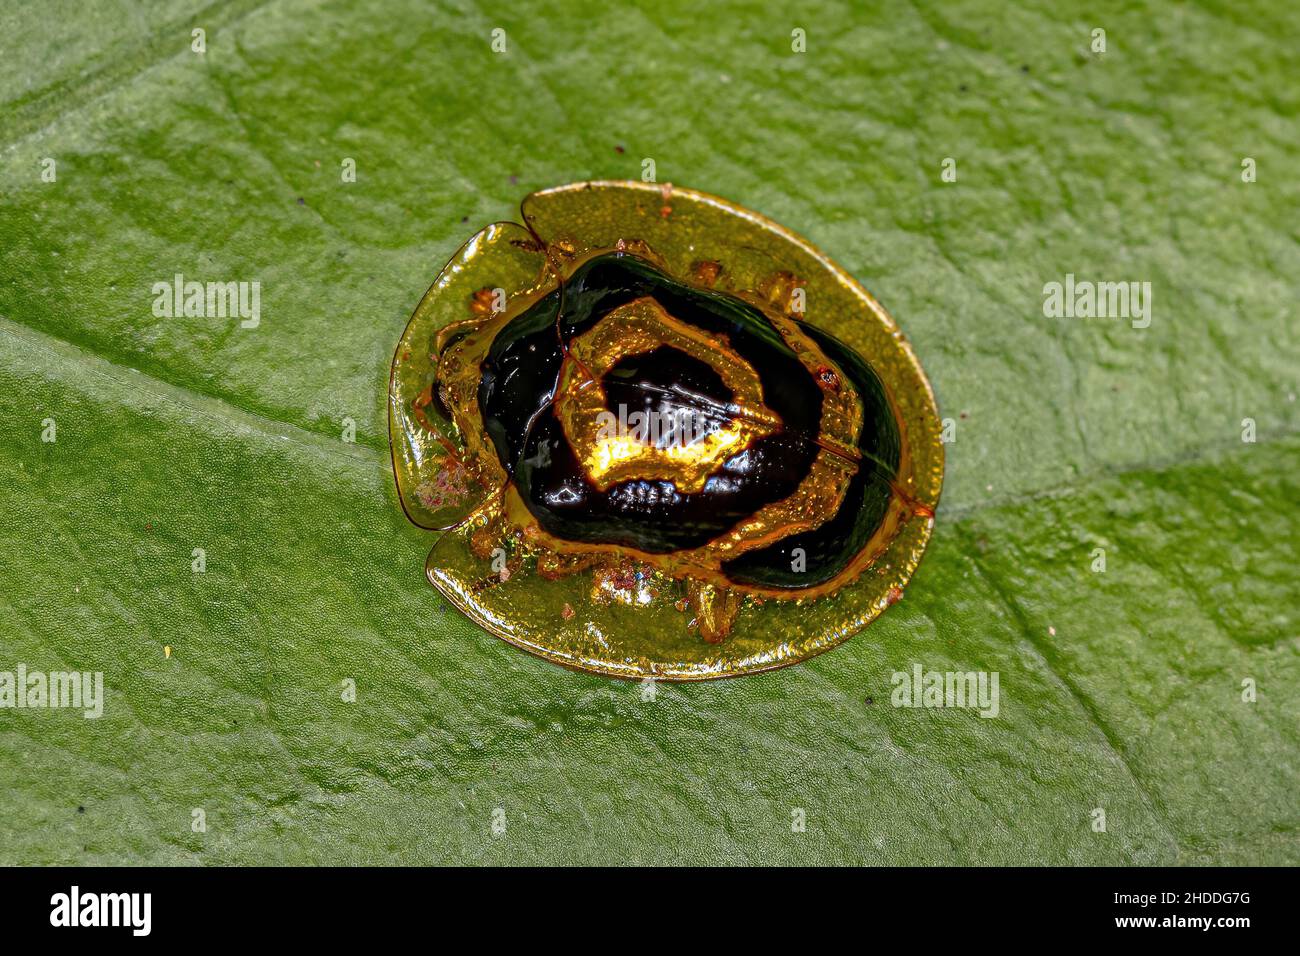 Adult Yellow Ringed Tortoise Beetle of the species Ischnocodia annulus Stock Photo